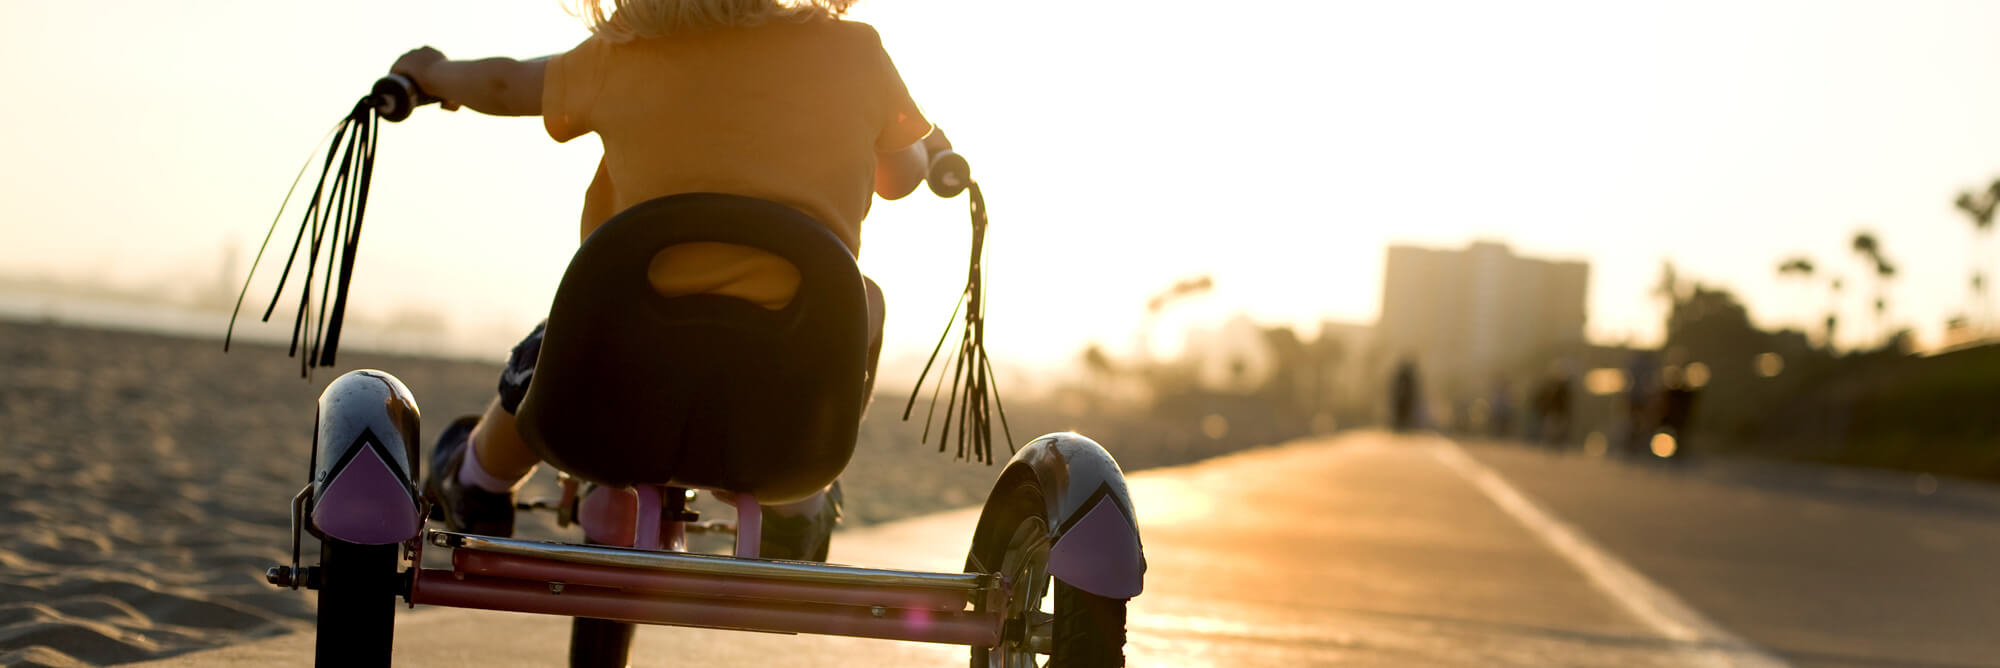 A child riding a tricycle as the sun sets in the background